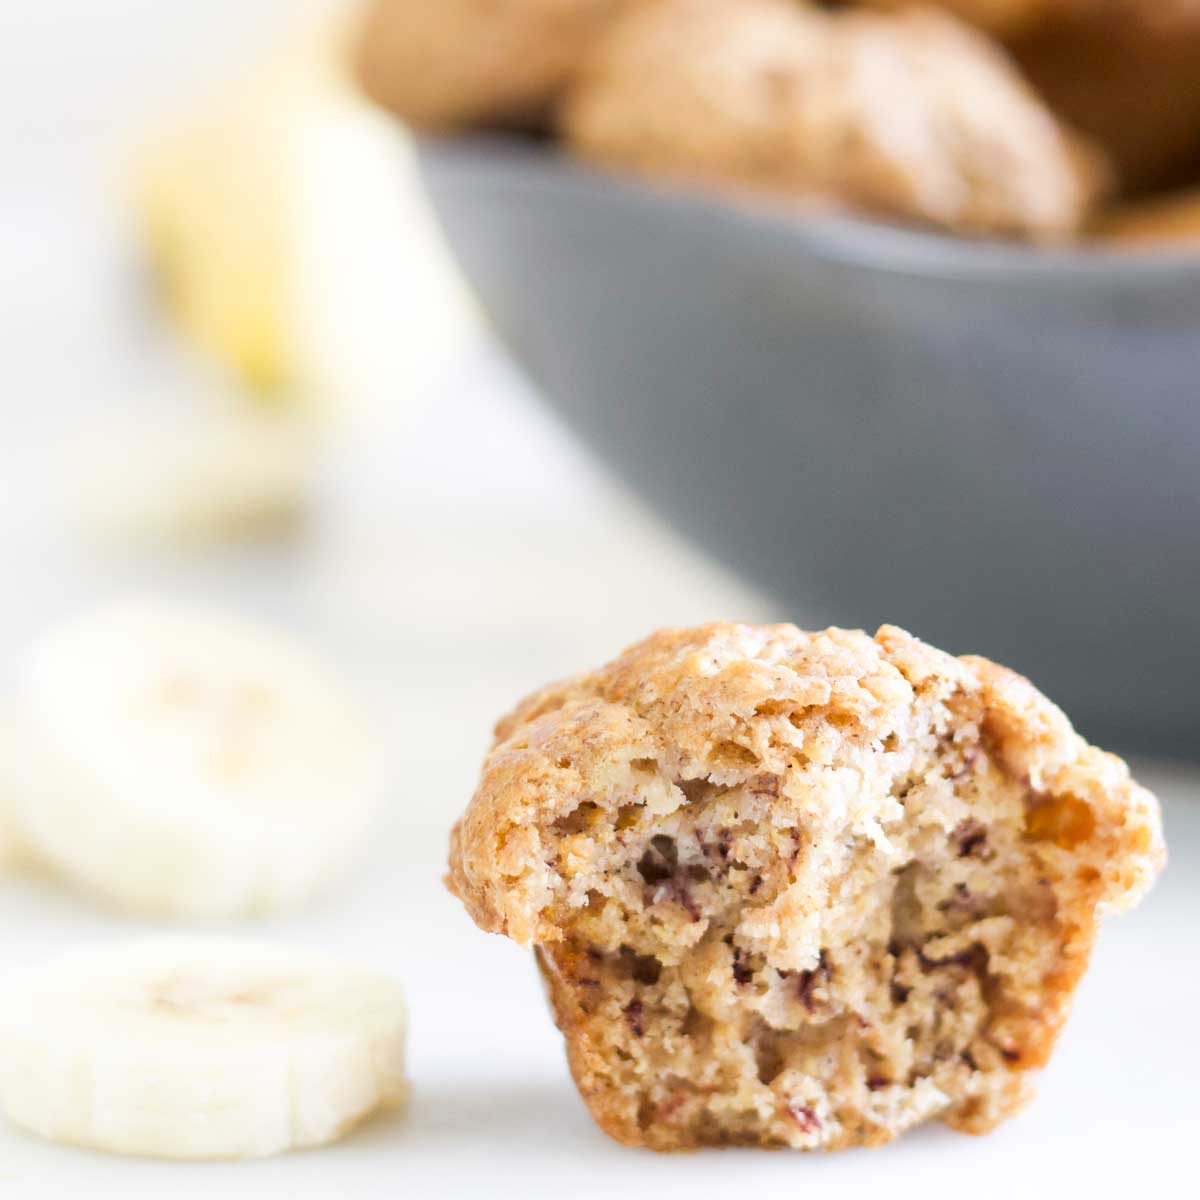 https://www.healthylittlefoodies.com/wp-content/uploads/2020/04/baby-banana-muffins-square.jpg